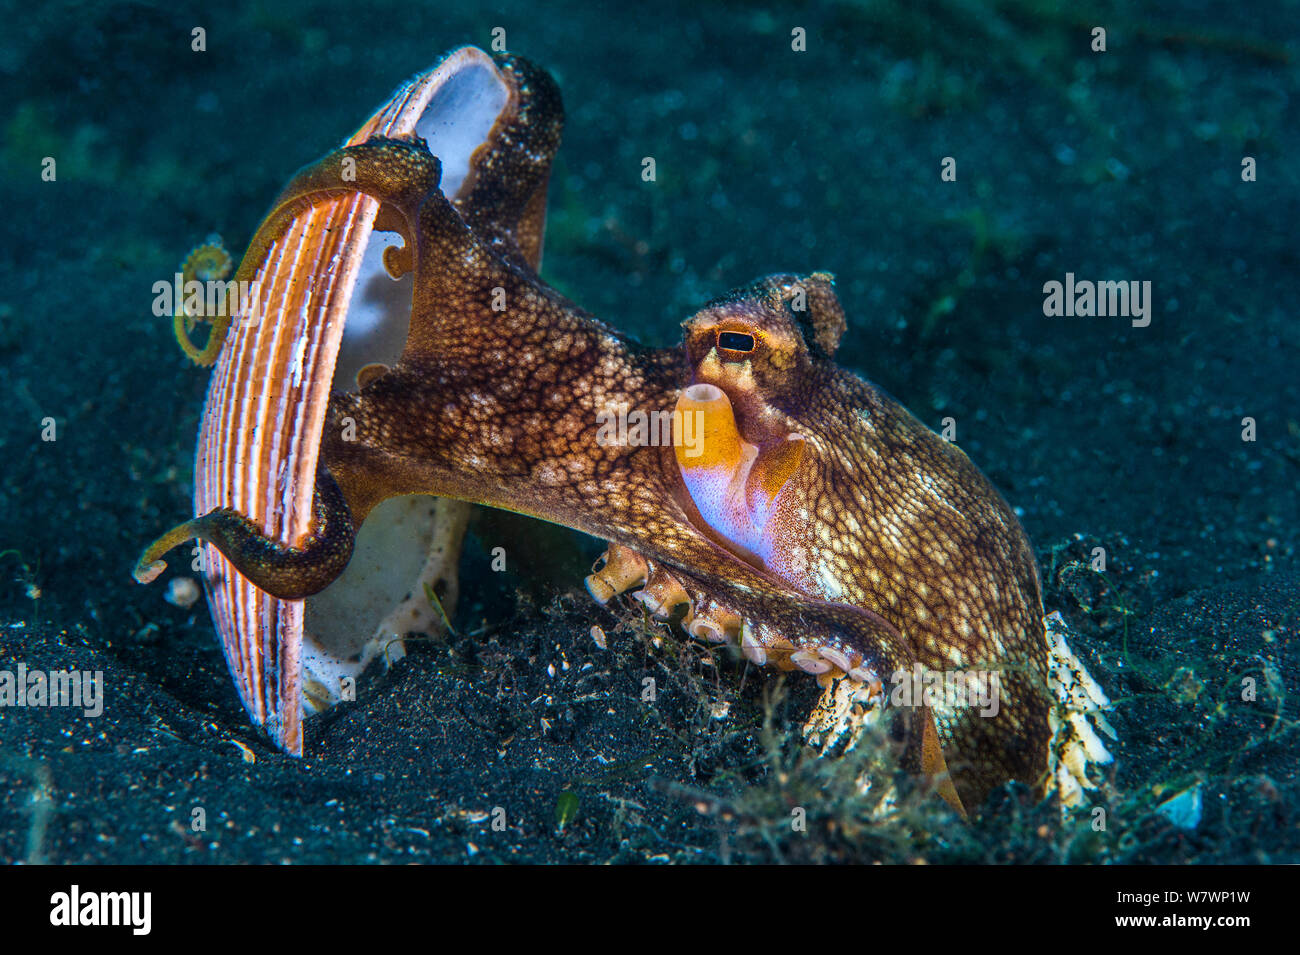 Veined octopus (Amphioctopus marginatus) comes out from its den, lifting up piece of shell. Bitung, North Sulawesi, Indonesia. Lembeh Strait, Molucca Sea. Stock Photo